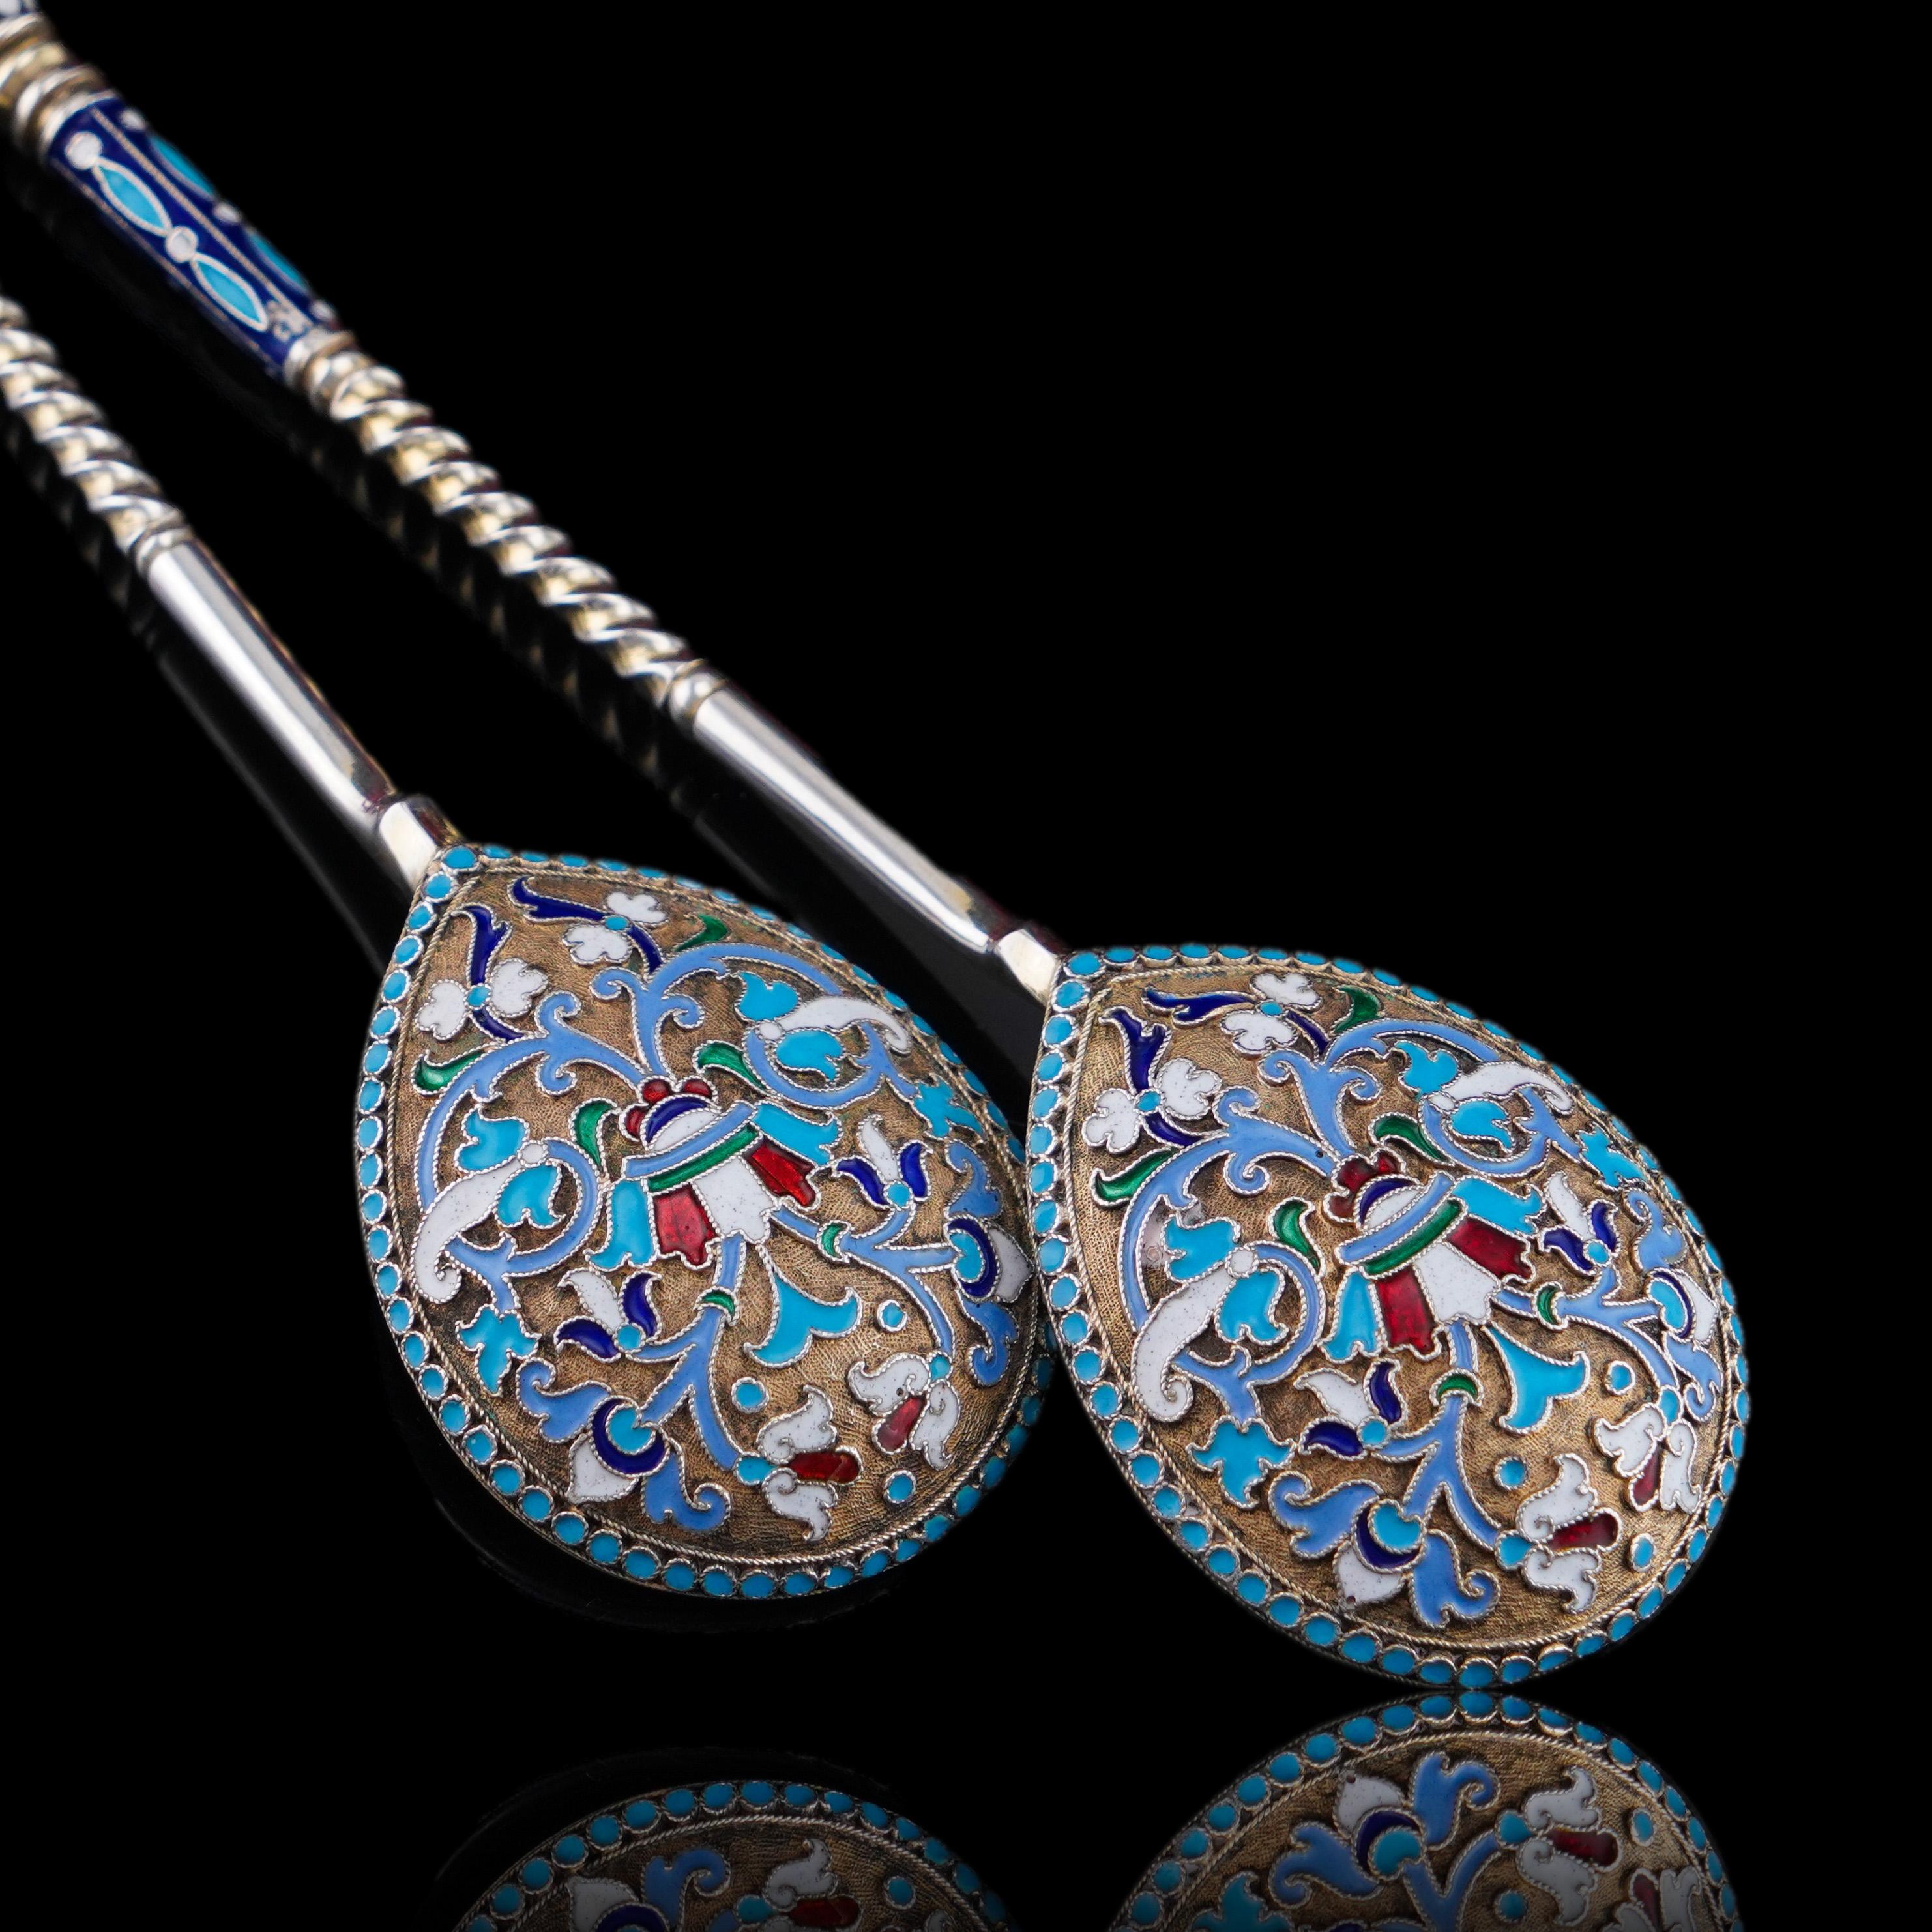 Antique Imperial Russian Solid Silver Spoons with Cloisonne Enamel c.1882 For Sale 11